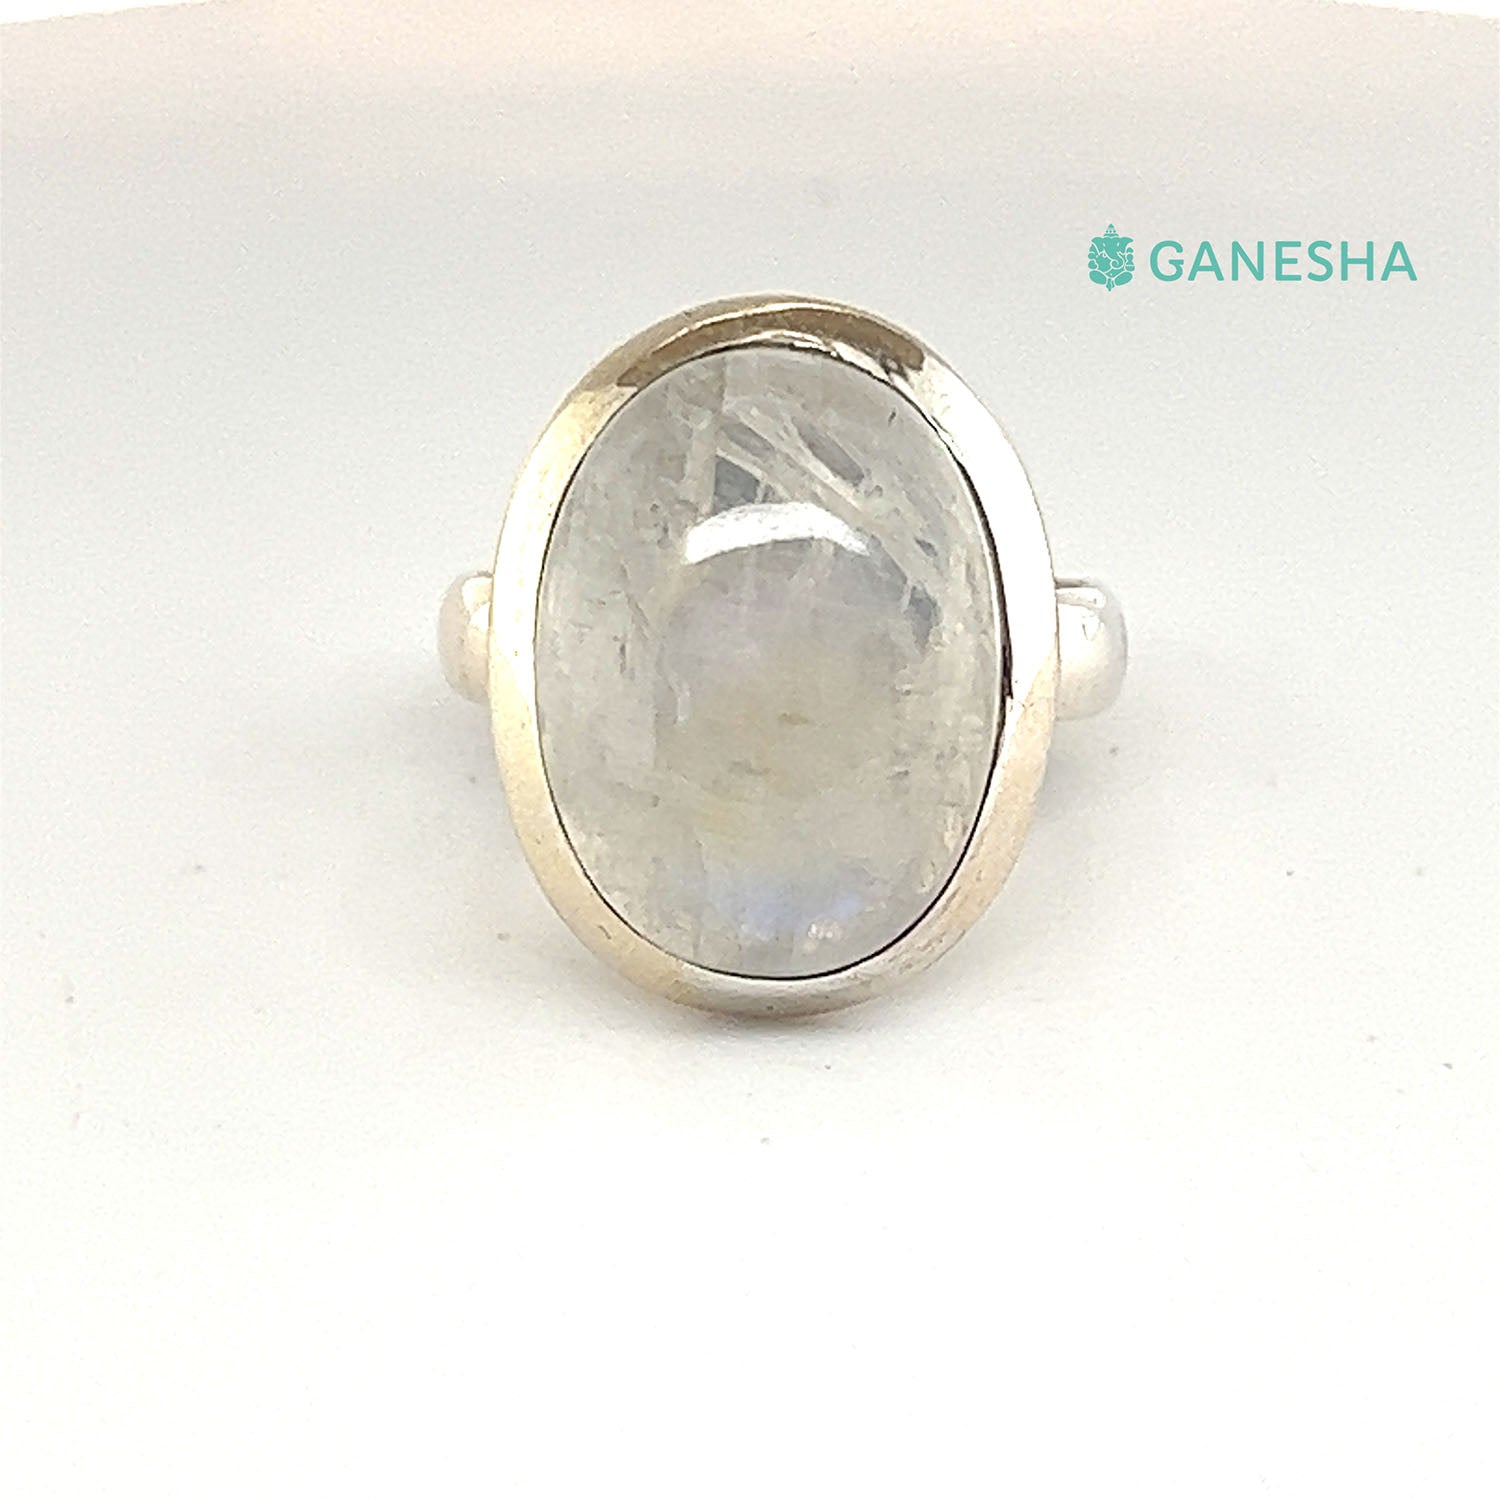 ganesha-handicrafts-womens-moonstone-sterling-silver-jewellery-gift-with-chain